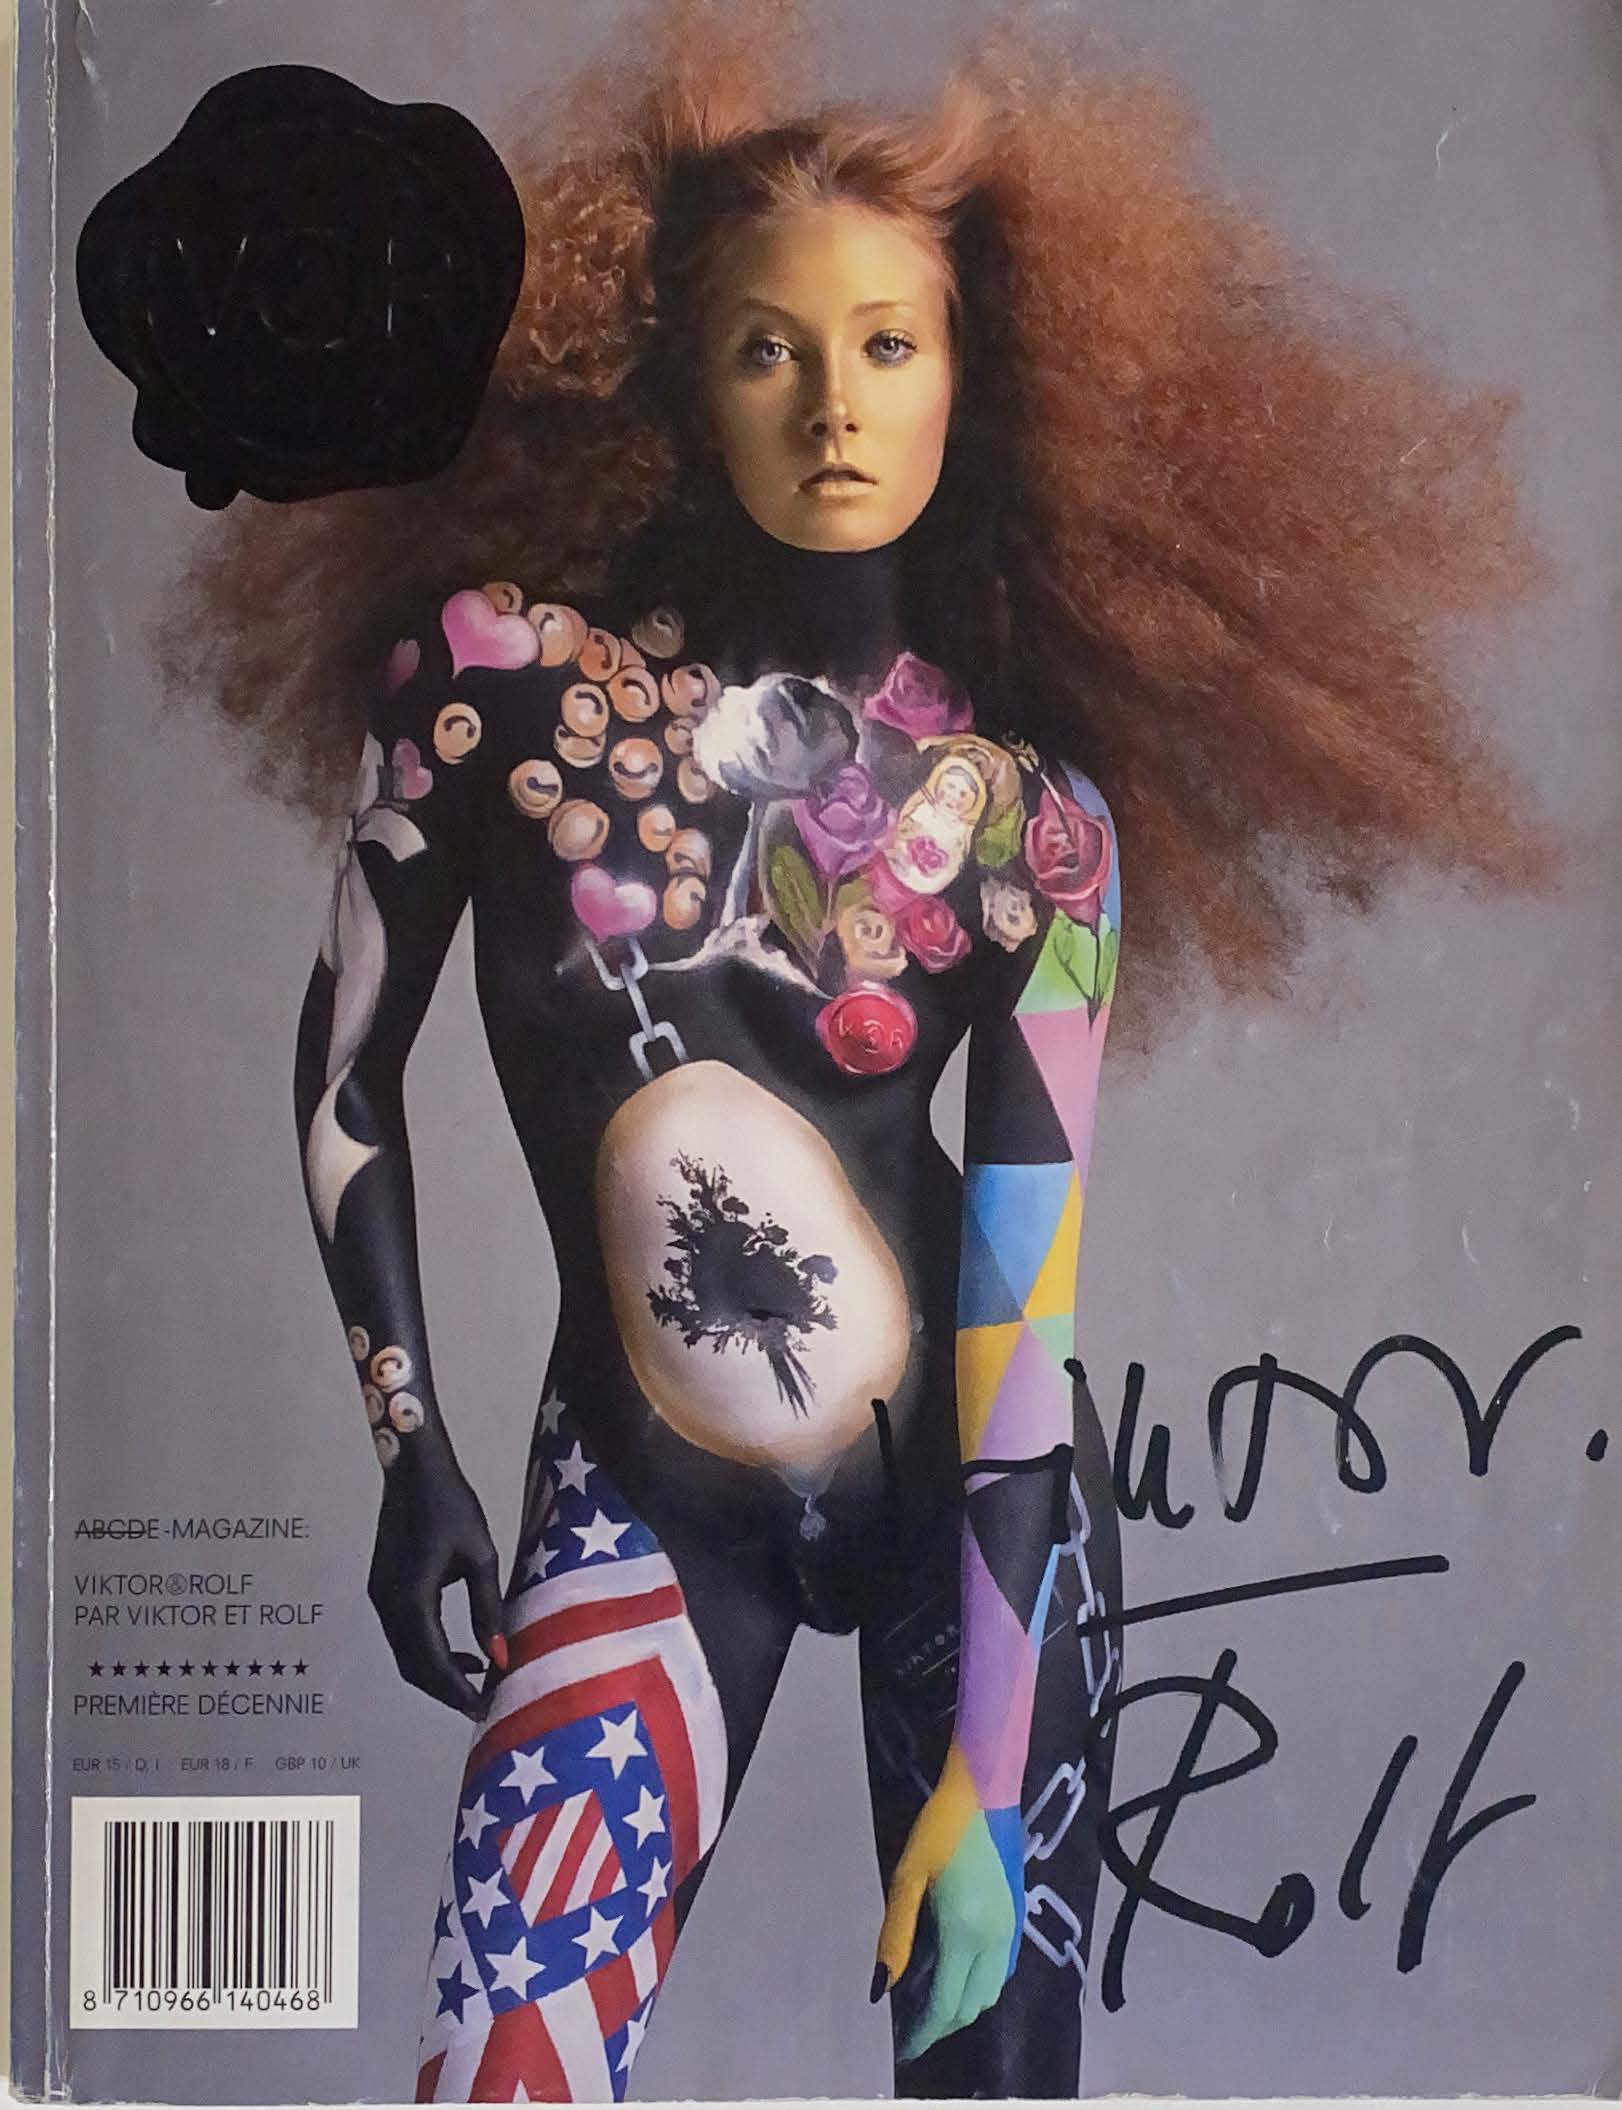 A Magazine N°E Curated by Viktor & Rolf